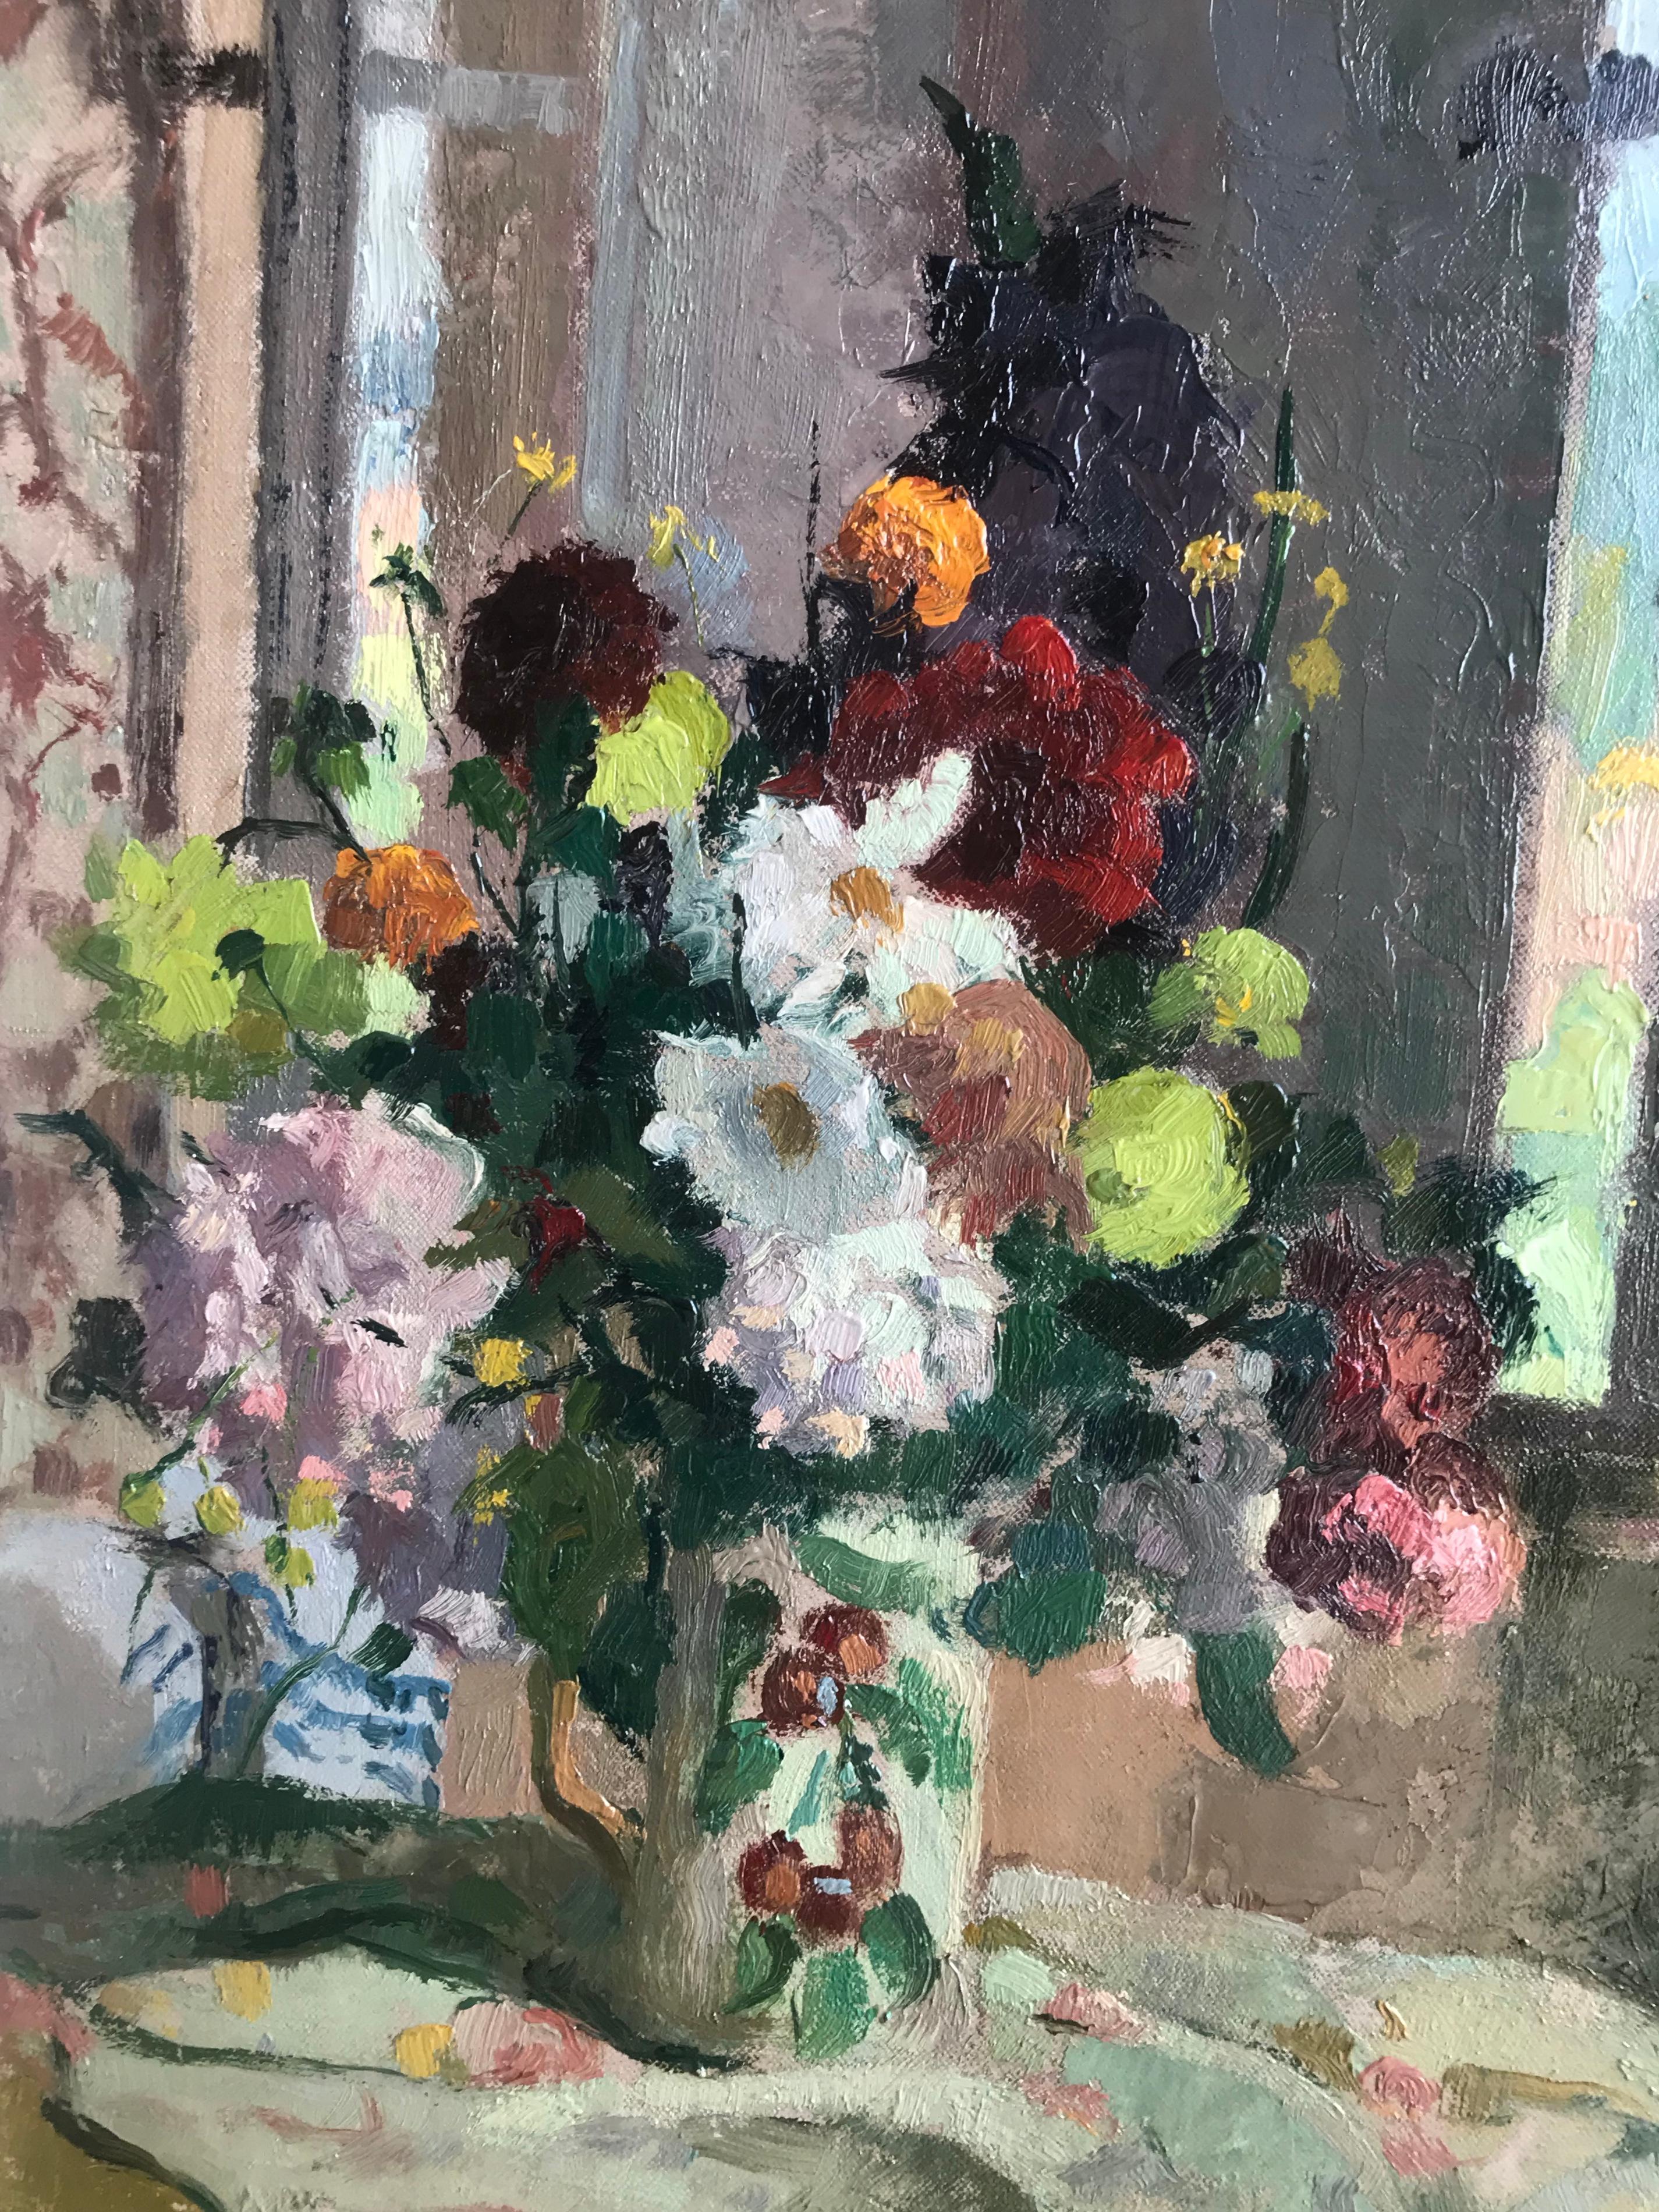 Louis Charrat (1903-1971)
A still life of summer flowers by a window
Signed
Oil on canvas
18 x 15 inches

A really joyful explosion of colour and painterly flourishes with a vase of summer flowers on a table cloth and a glimpse of a sunlit garden